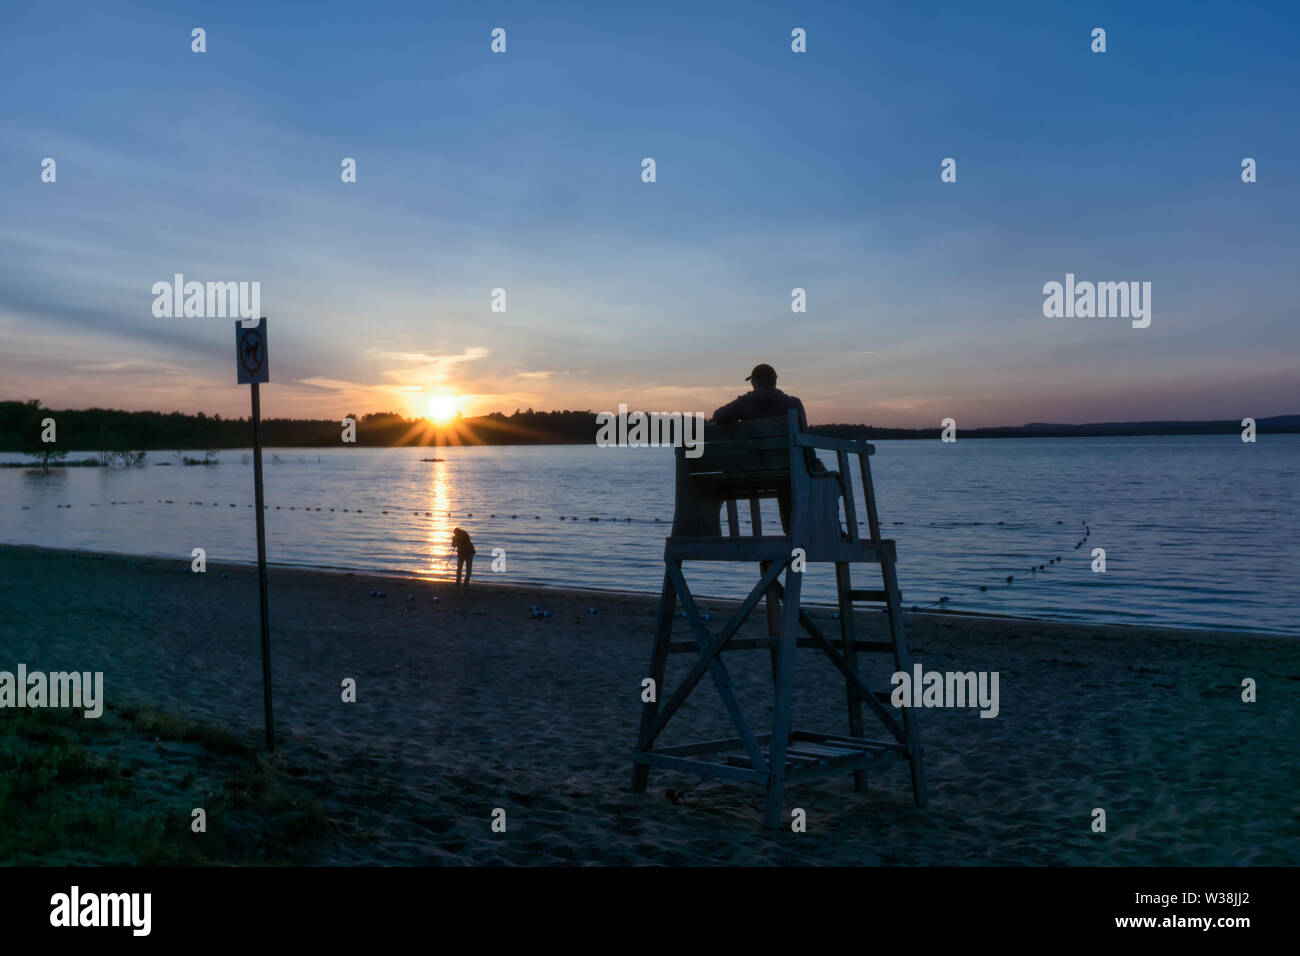 Canada, Petawawa, sunset at Black Bear Beach, a man is sitting in the rescue tower, watching another man taking photos from sunset Stock Photo